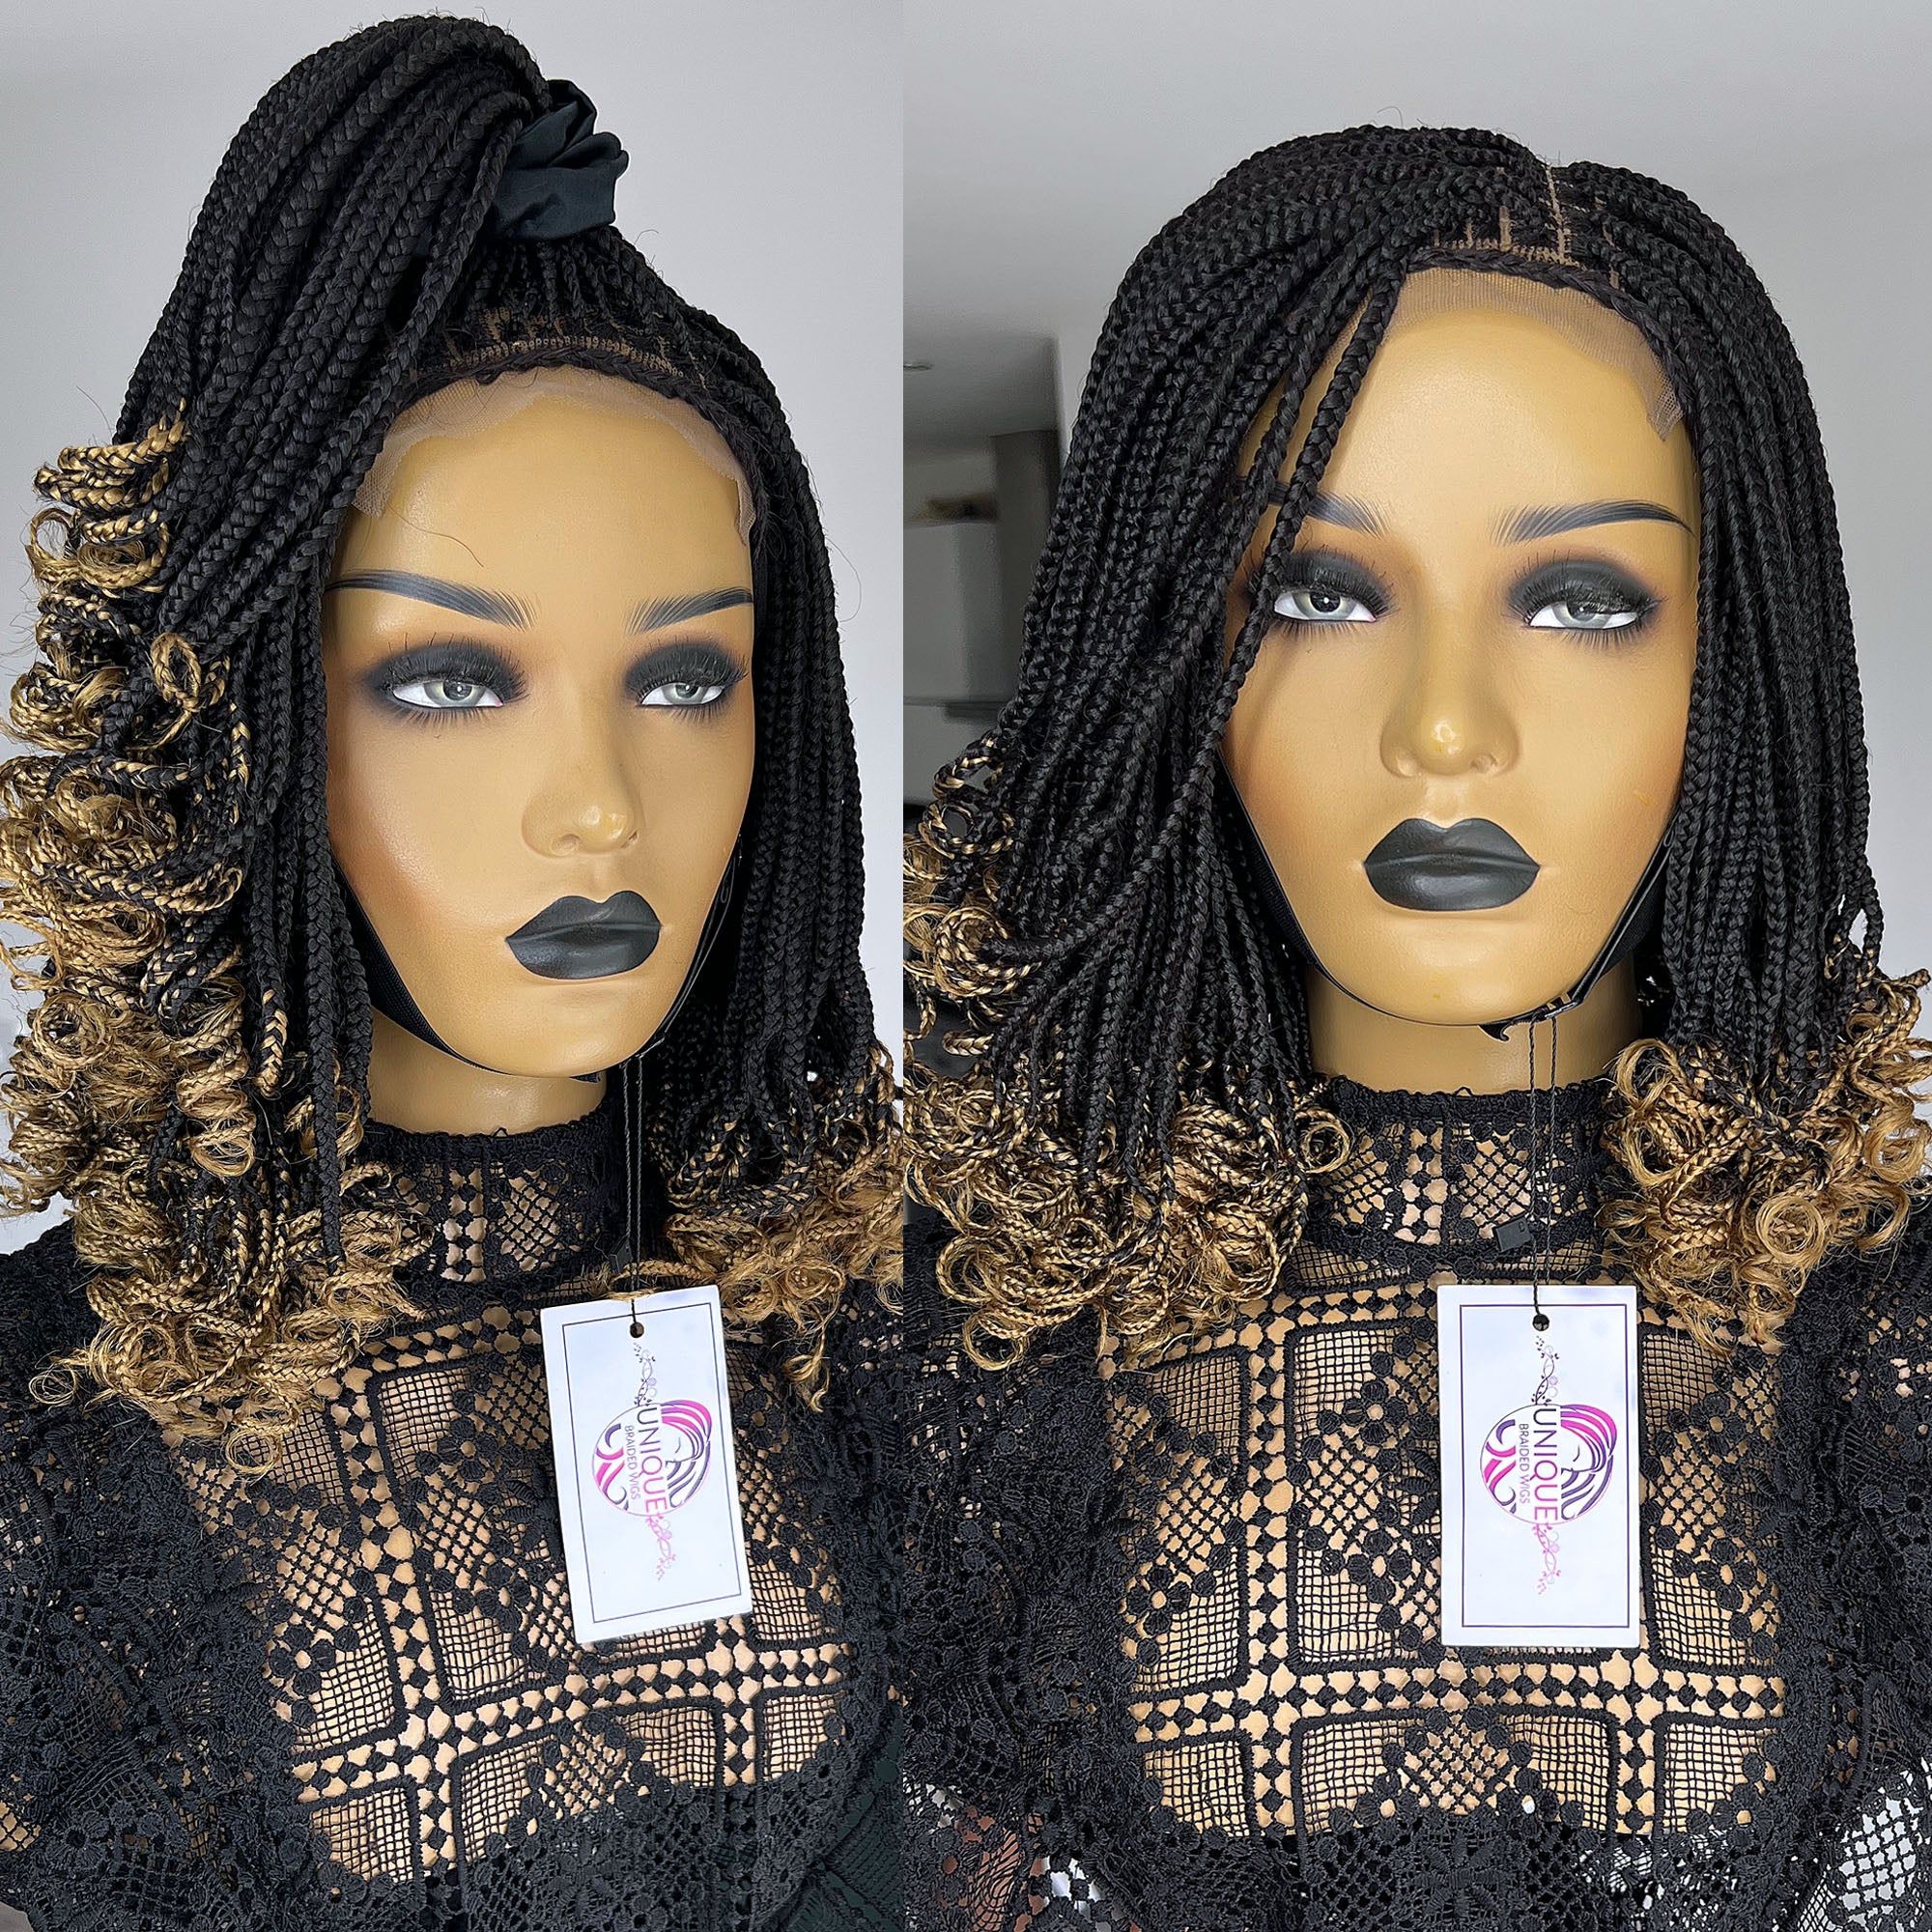 Curly Box Braids Handmade Braid Curls Braided Lace Front Wig Ombre